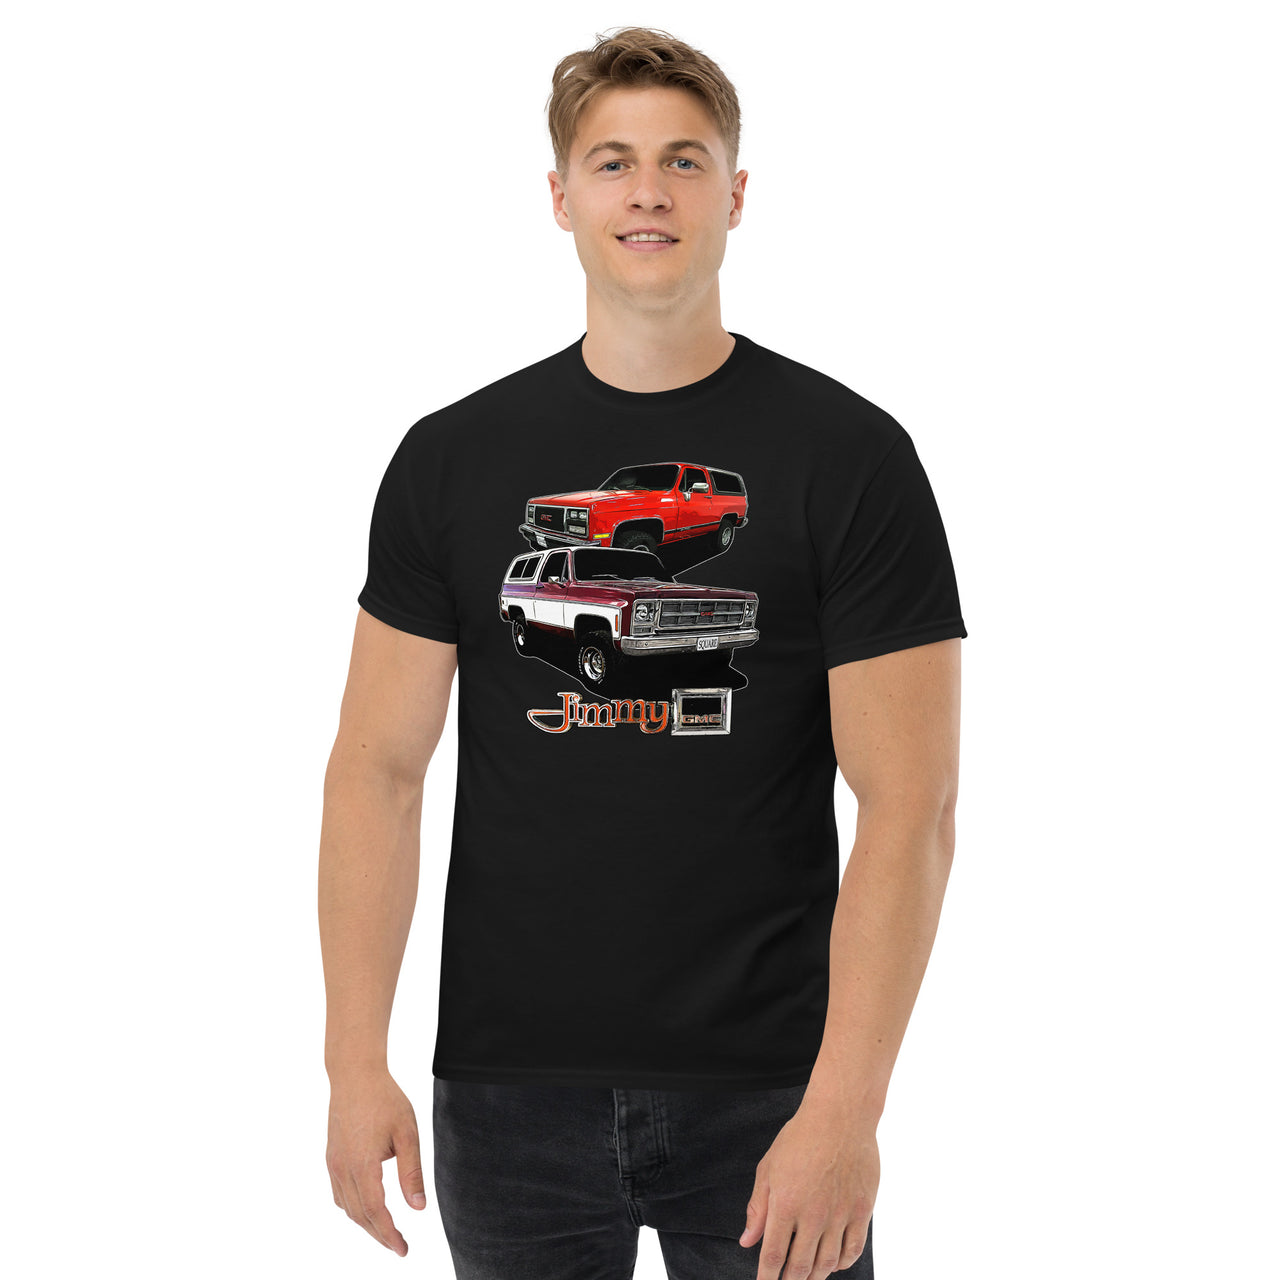 Square Body GMC Jimmy T-Shirt modeled in black